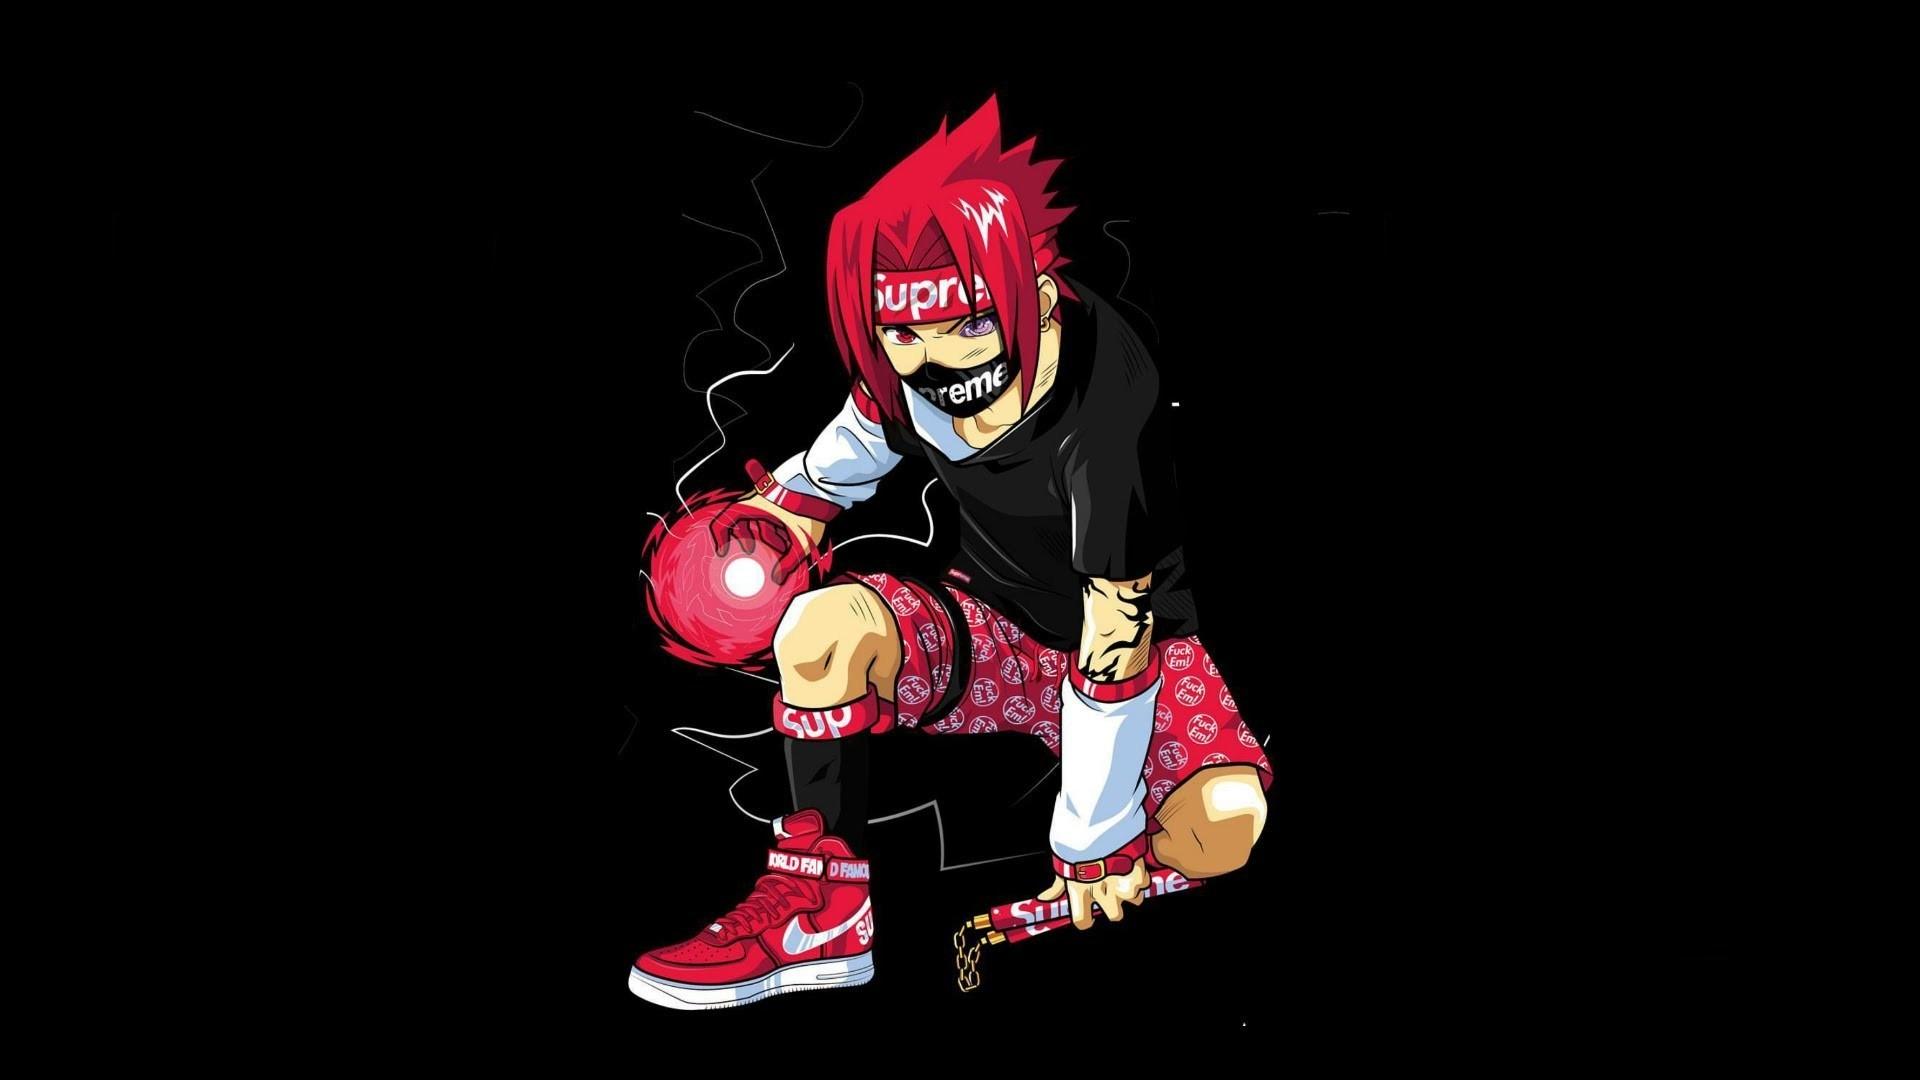 Anime Rapper Wallpapers - Top Free Anime Rapper | Anime rapper, Rapper art,  Anime